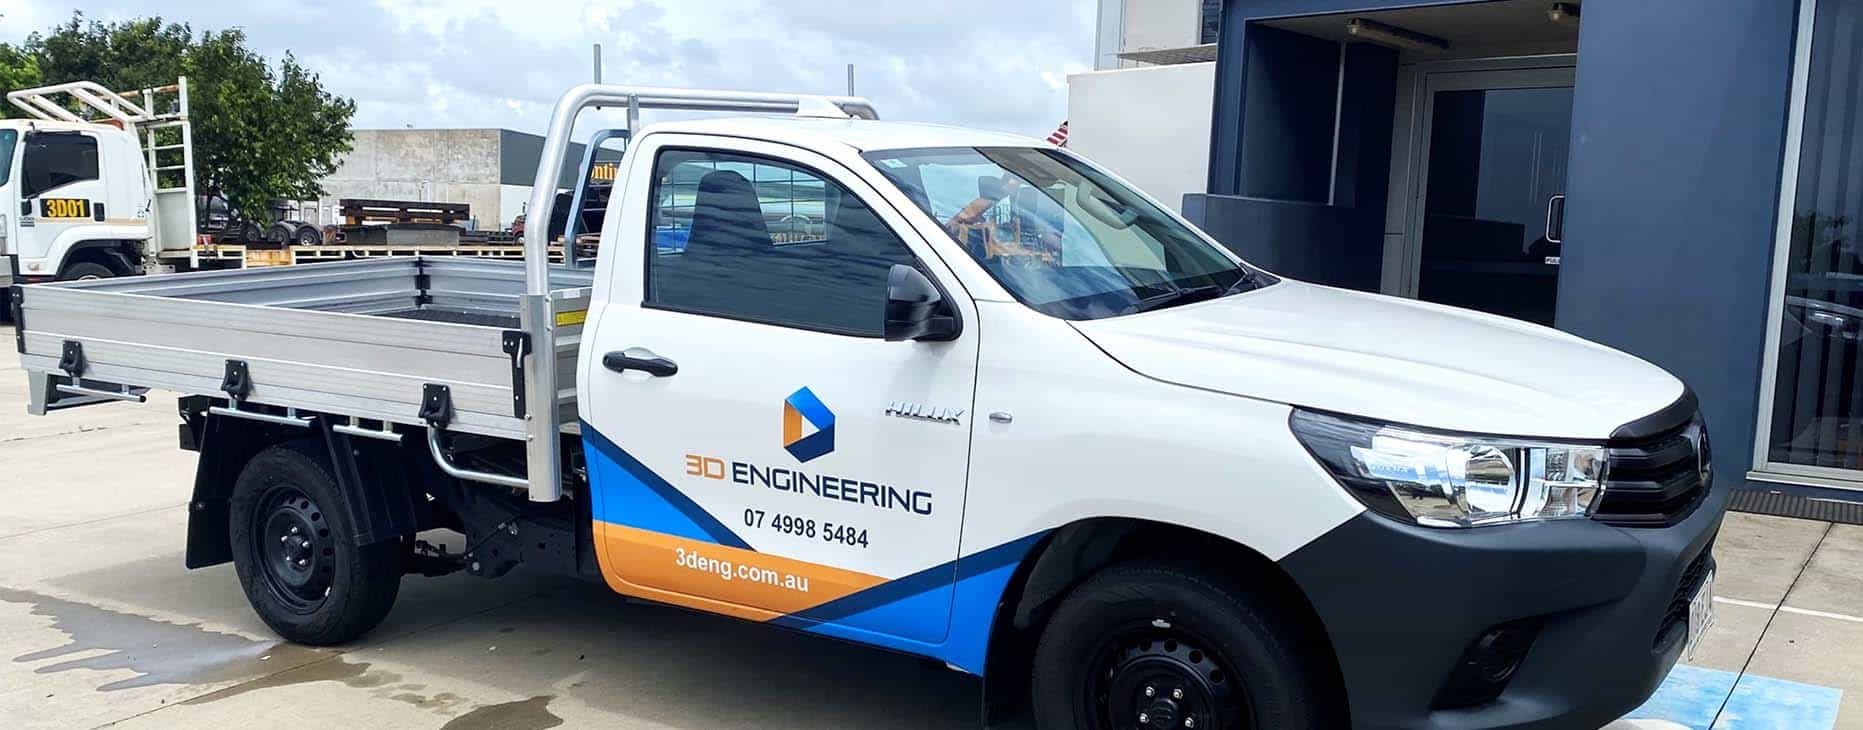 Company White Pickup Truck — Fabrication & Engineering in Mackay, QLD